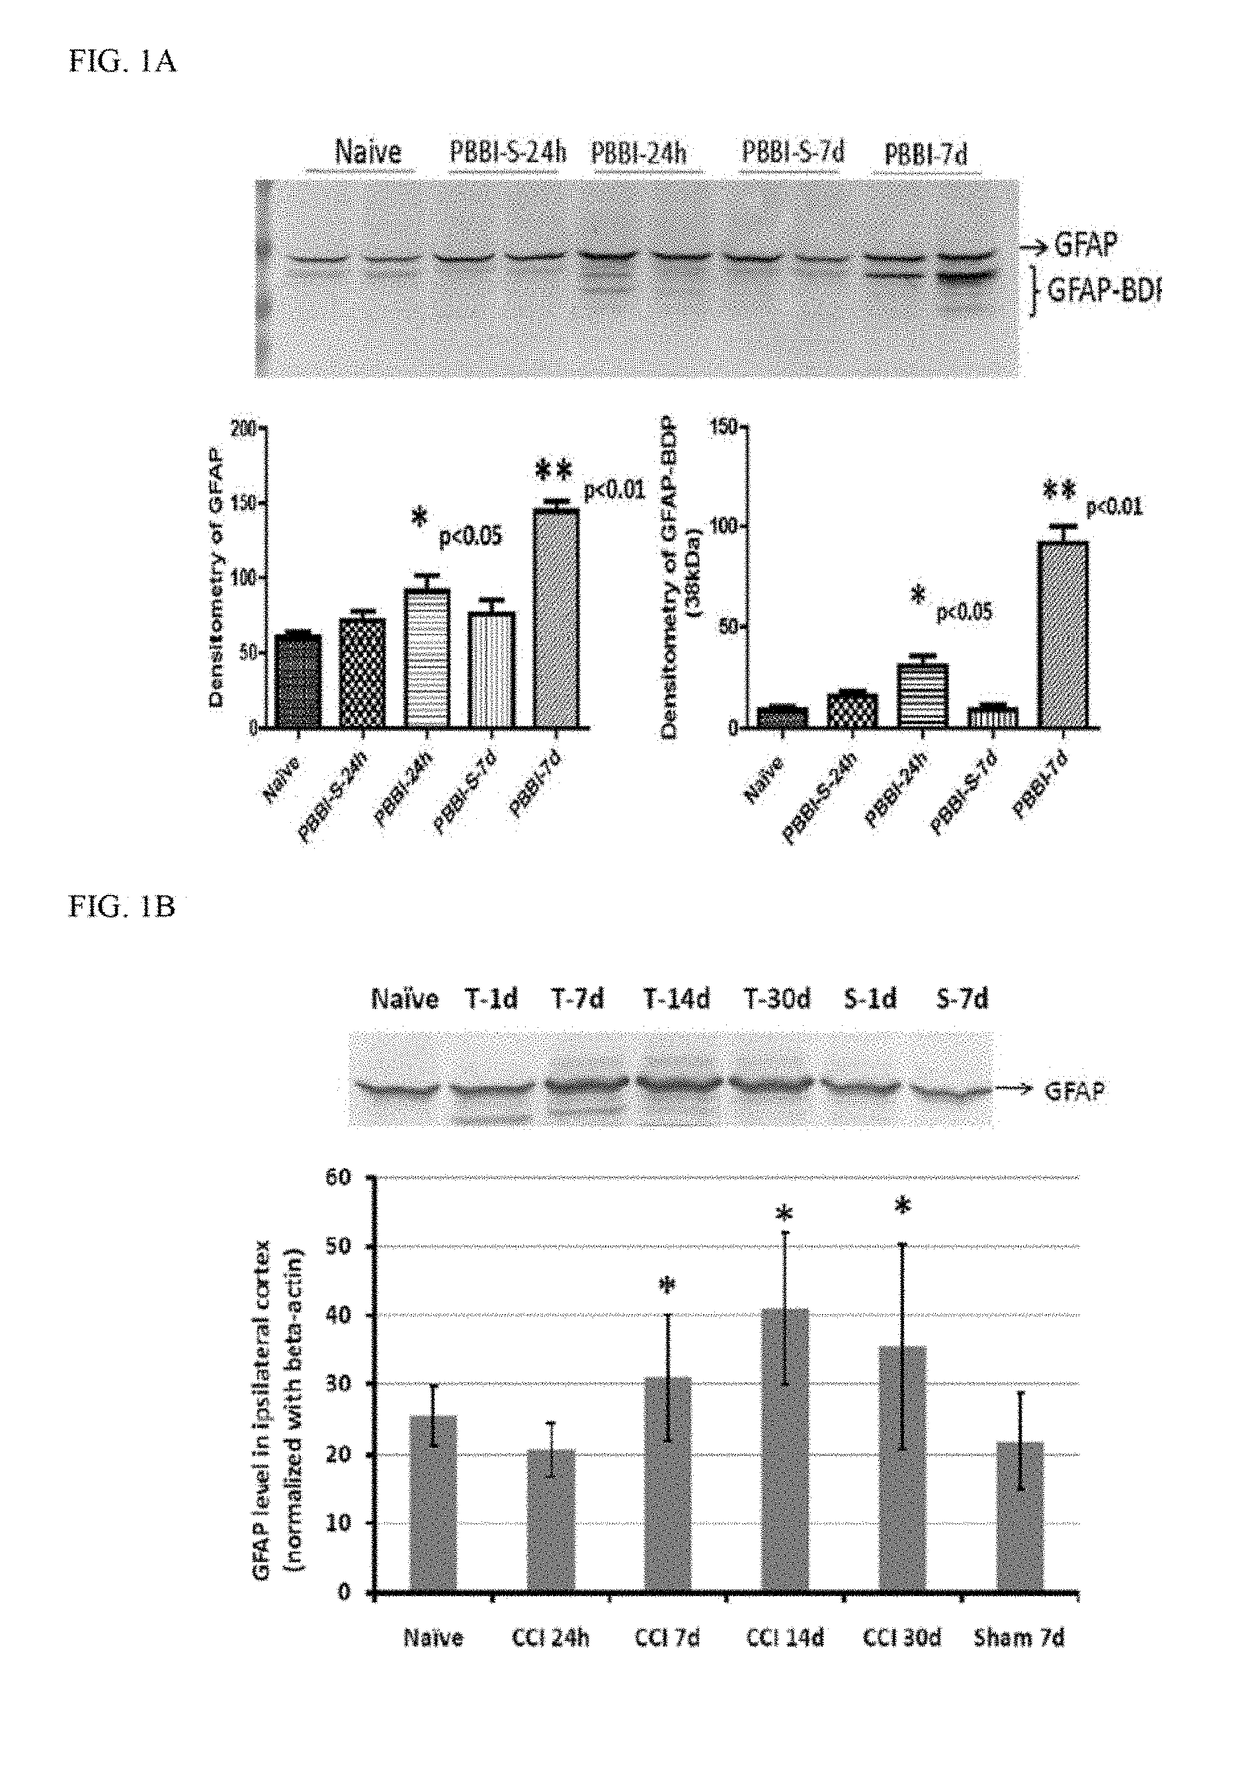 Micro-rna, autoantibody and protein markers for diagnosis of neuronal injury